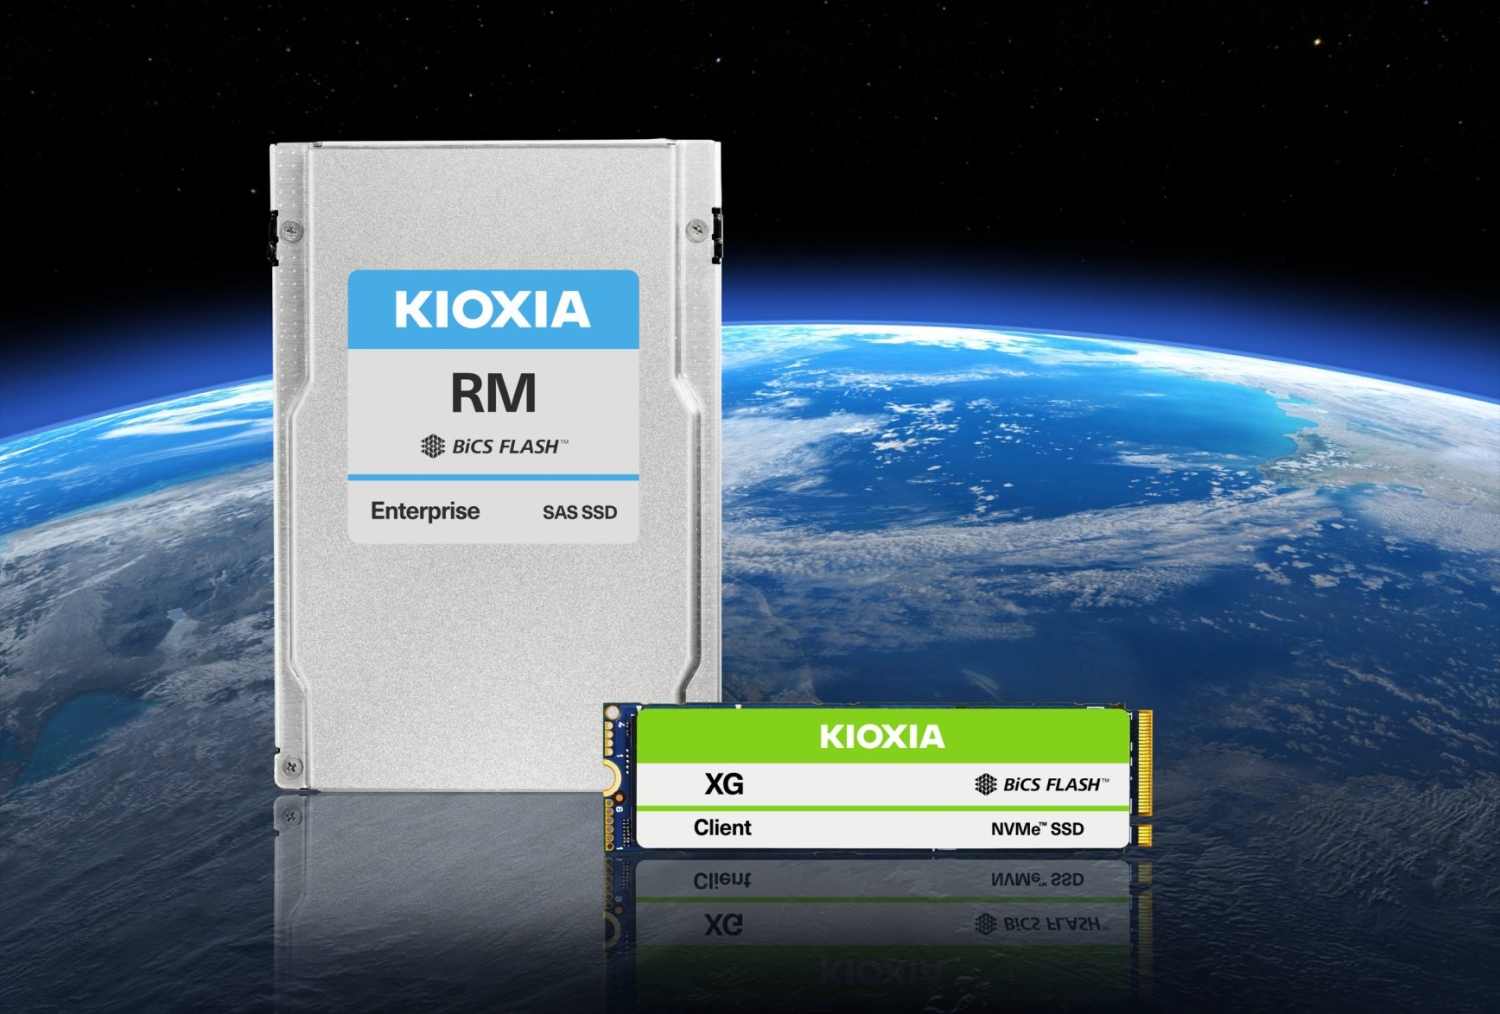 TweakTown Enlarged Image - KIOXIA SSDs are space-travel ready